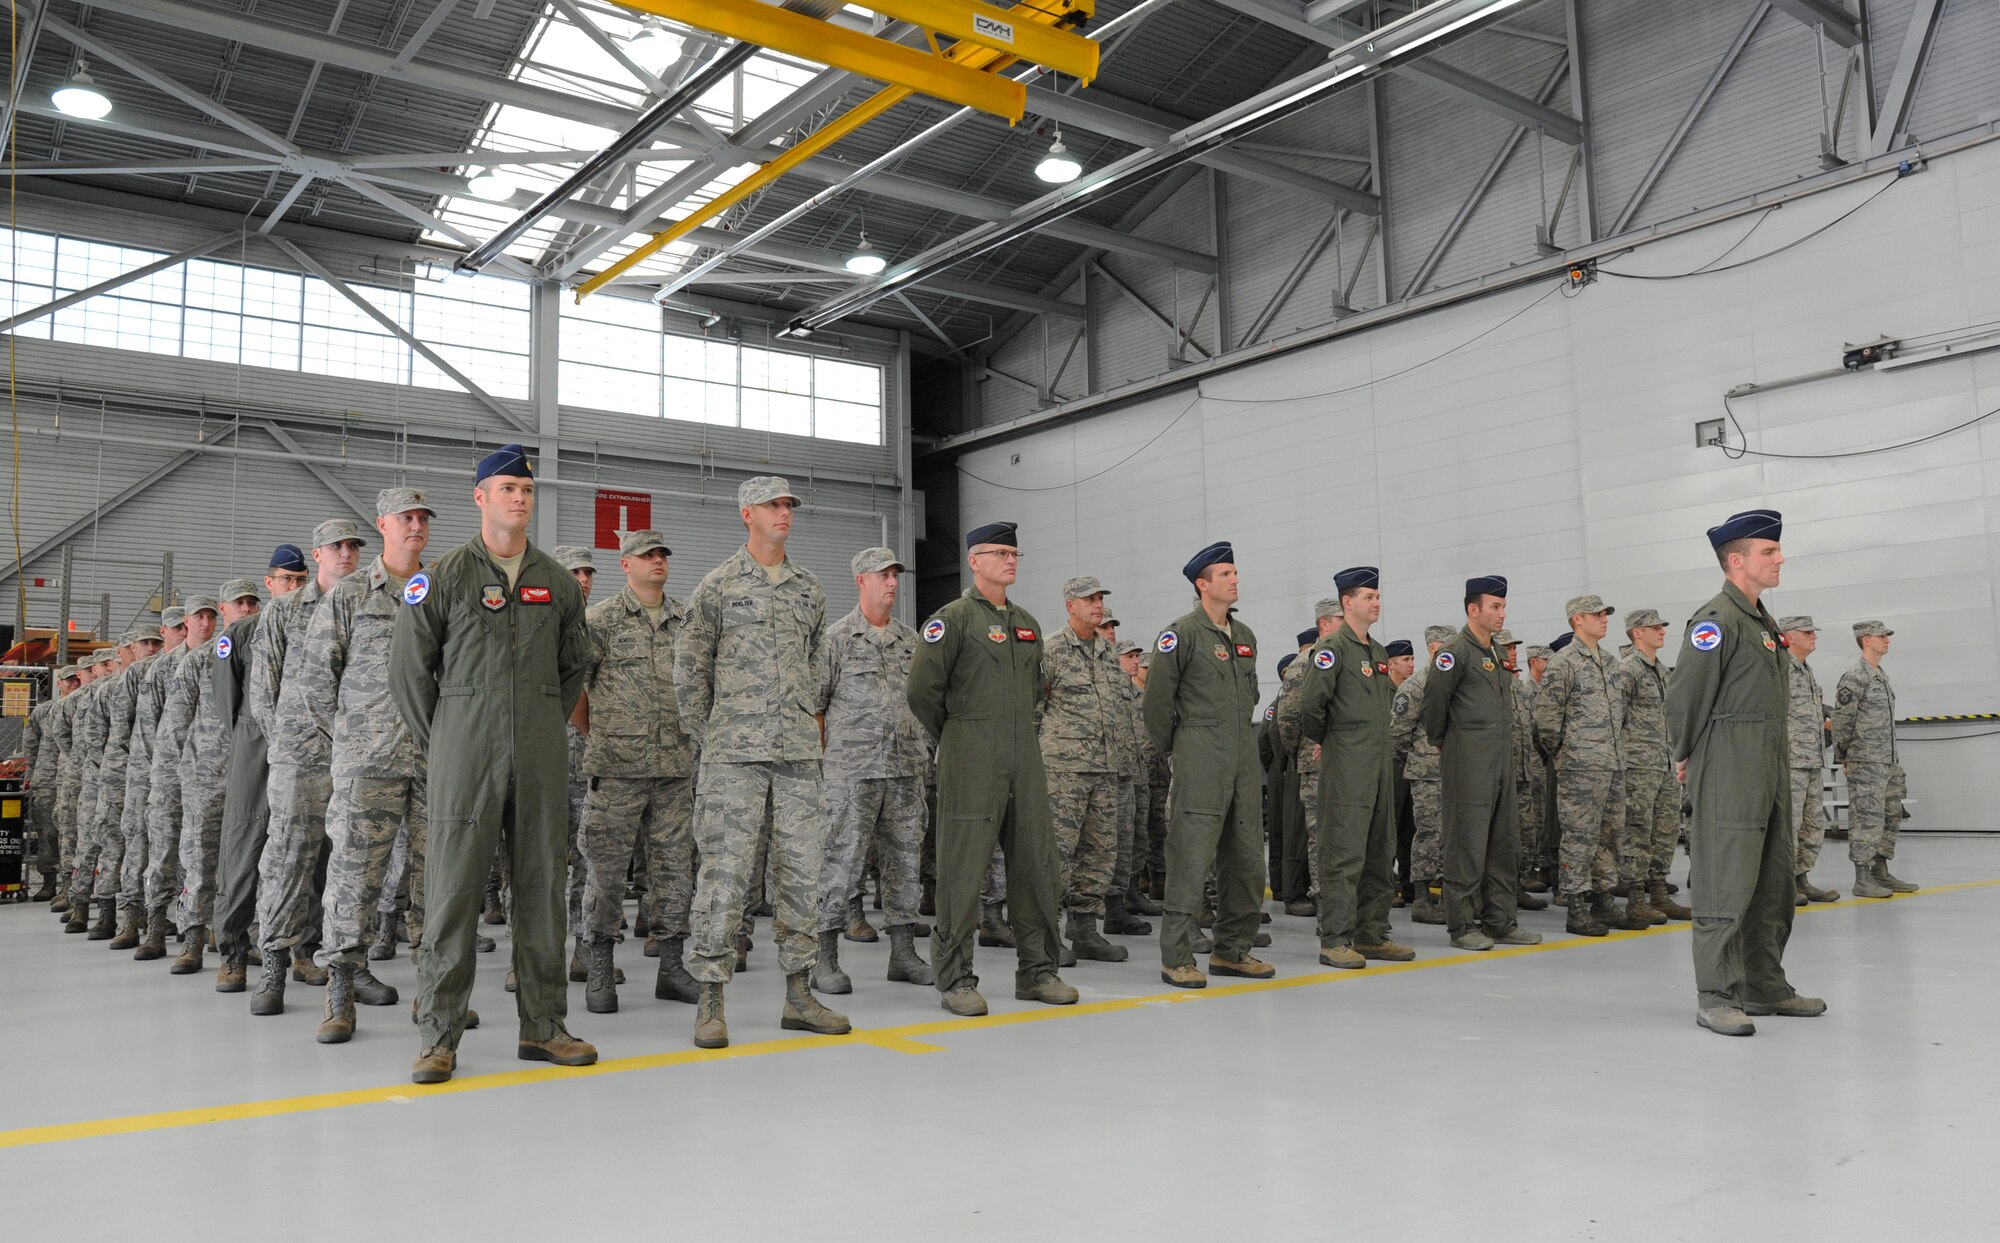 Oregon Air National Guard Airmen from the 123rd Expeditionary Fighter Squadron, 142nd Fighter Wing stand in formation and listen to remarks during their formal demobilization ceremony, Nov. 6, 2015, Portland Air National Guard Base, Ore. (U.S. Air National Guard photo by Tech. Sgt. John Hughel, 142nd Fighter Wing Public Affairs/Released)